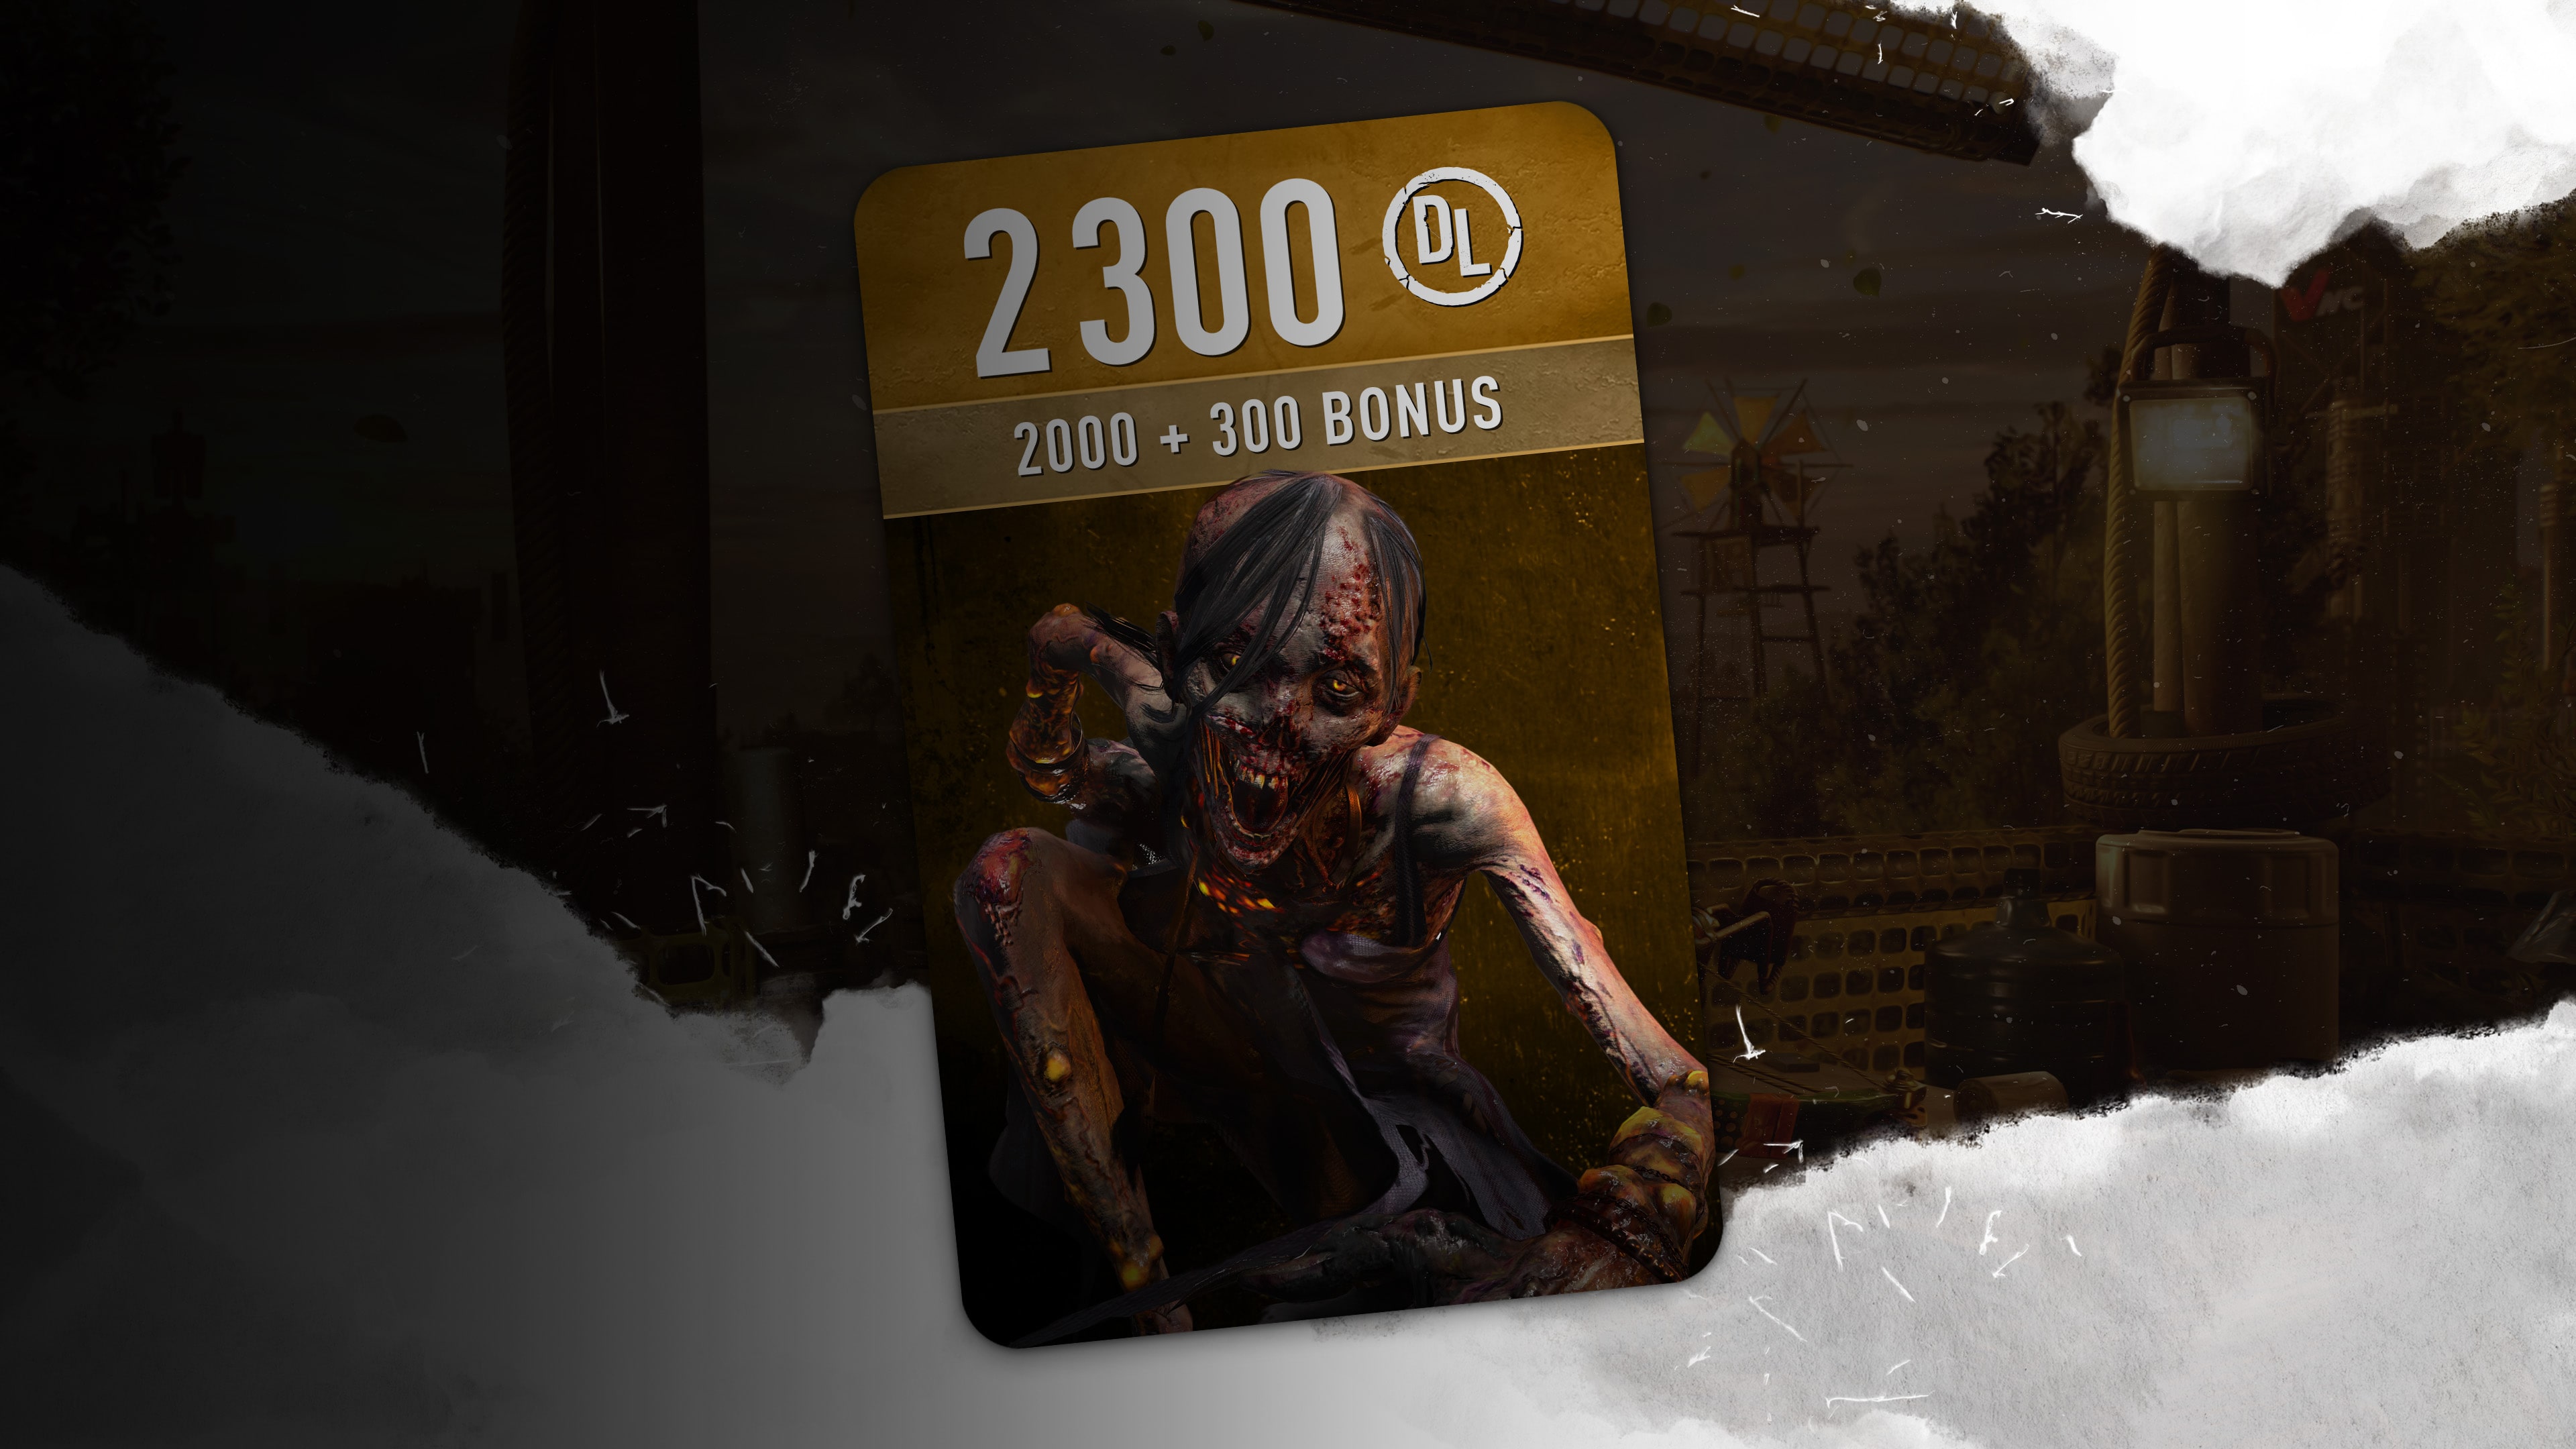 Dying Light 2 Stay Human - 2300 DL Points